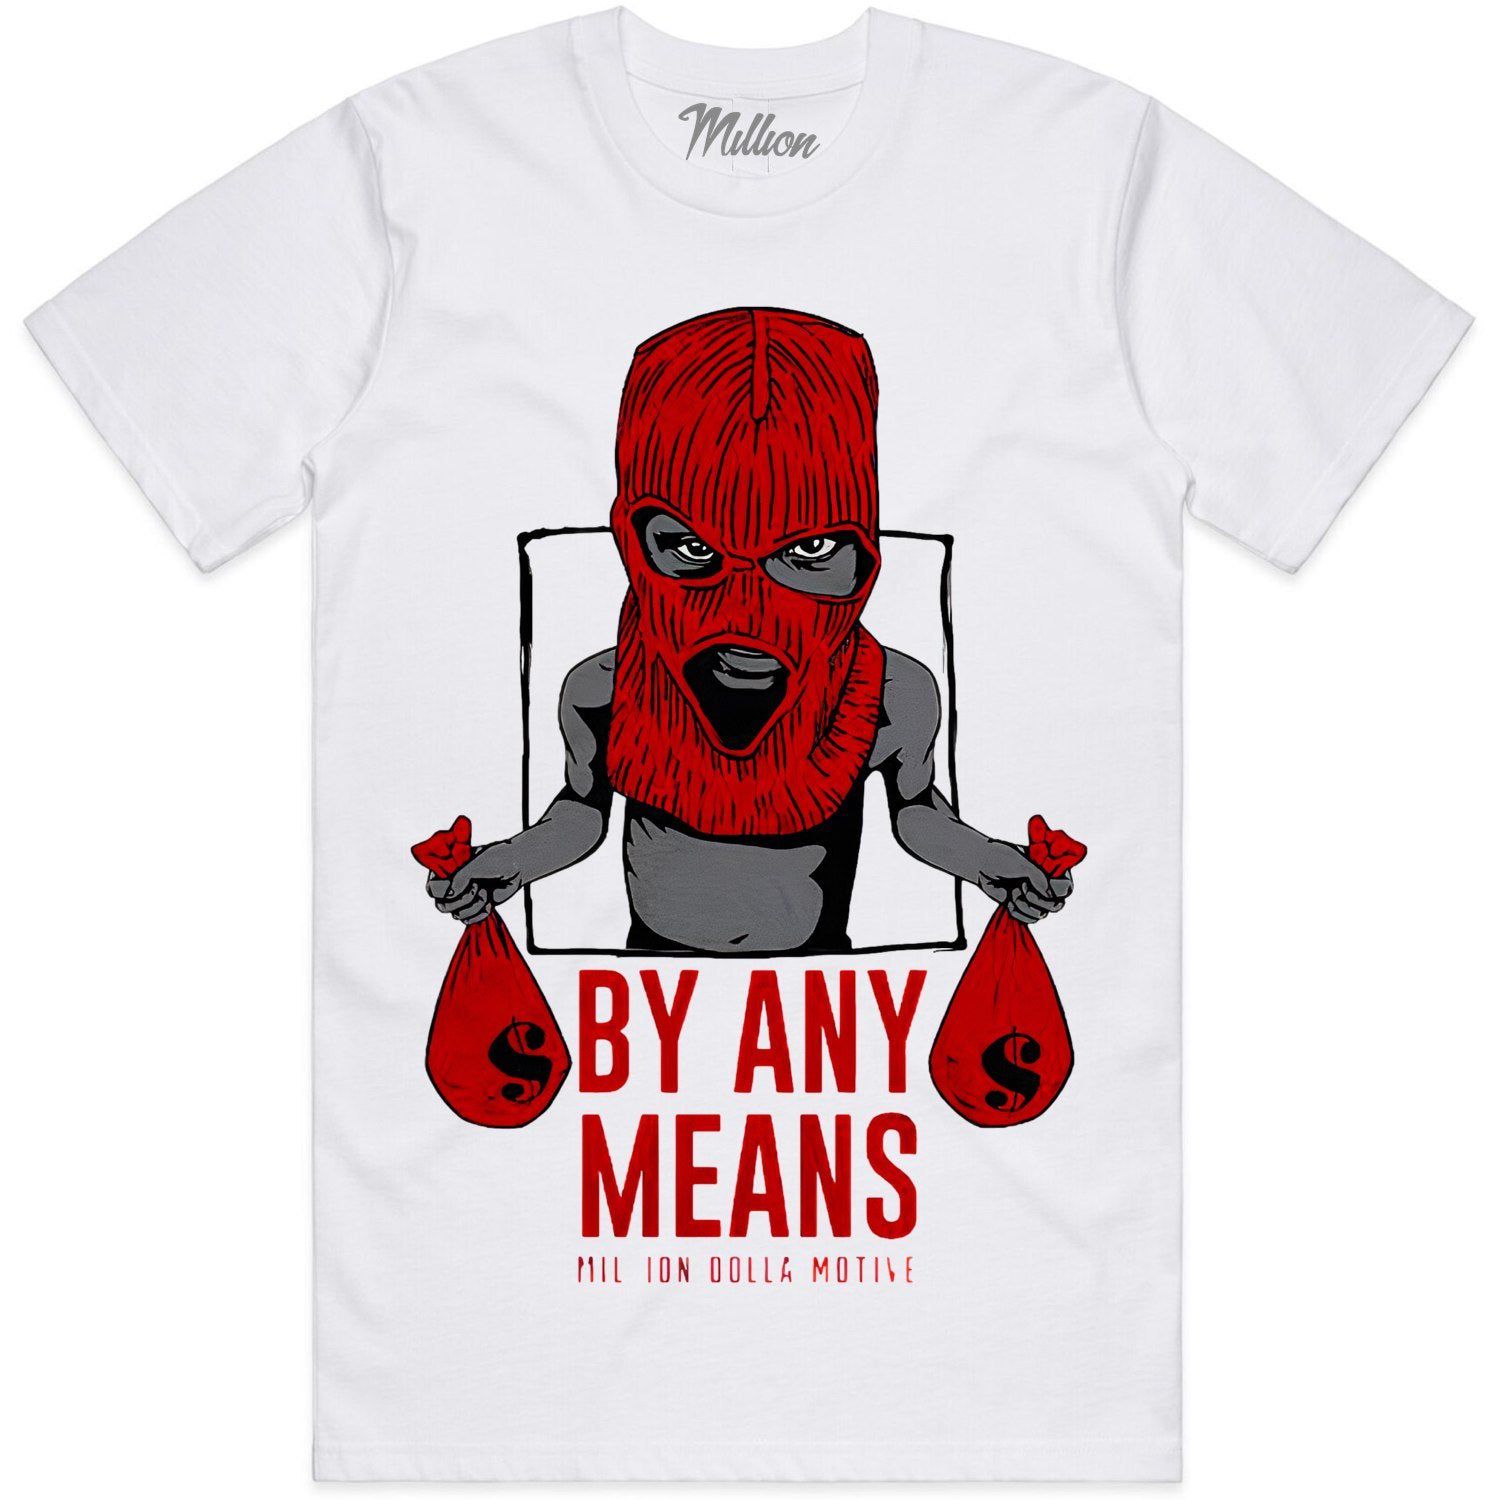 Cherry 12s Shirt - Jordan 12 Cherry Sneaker Tees - By Any Means